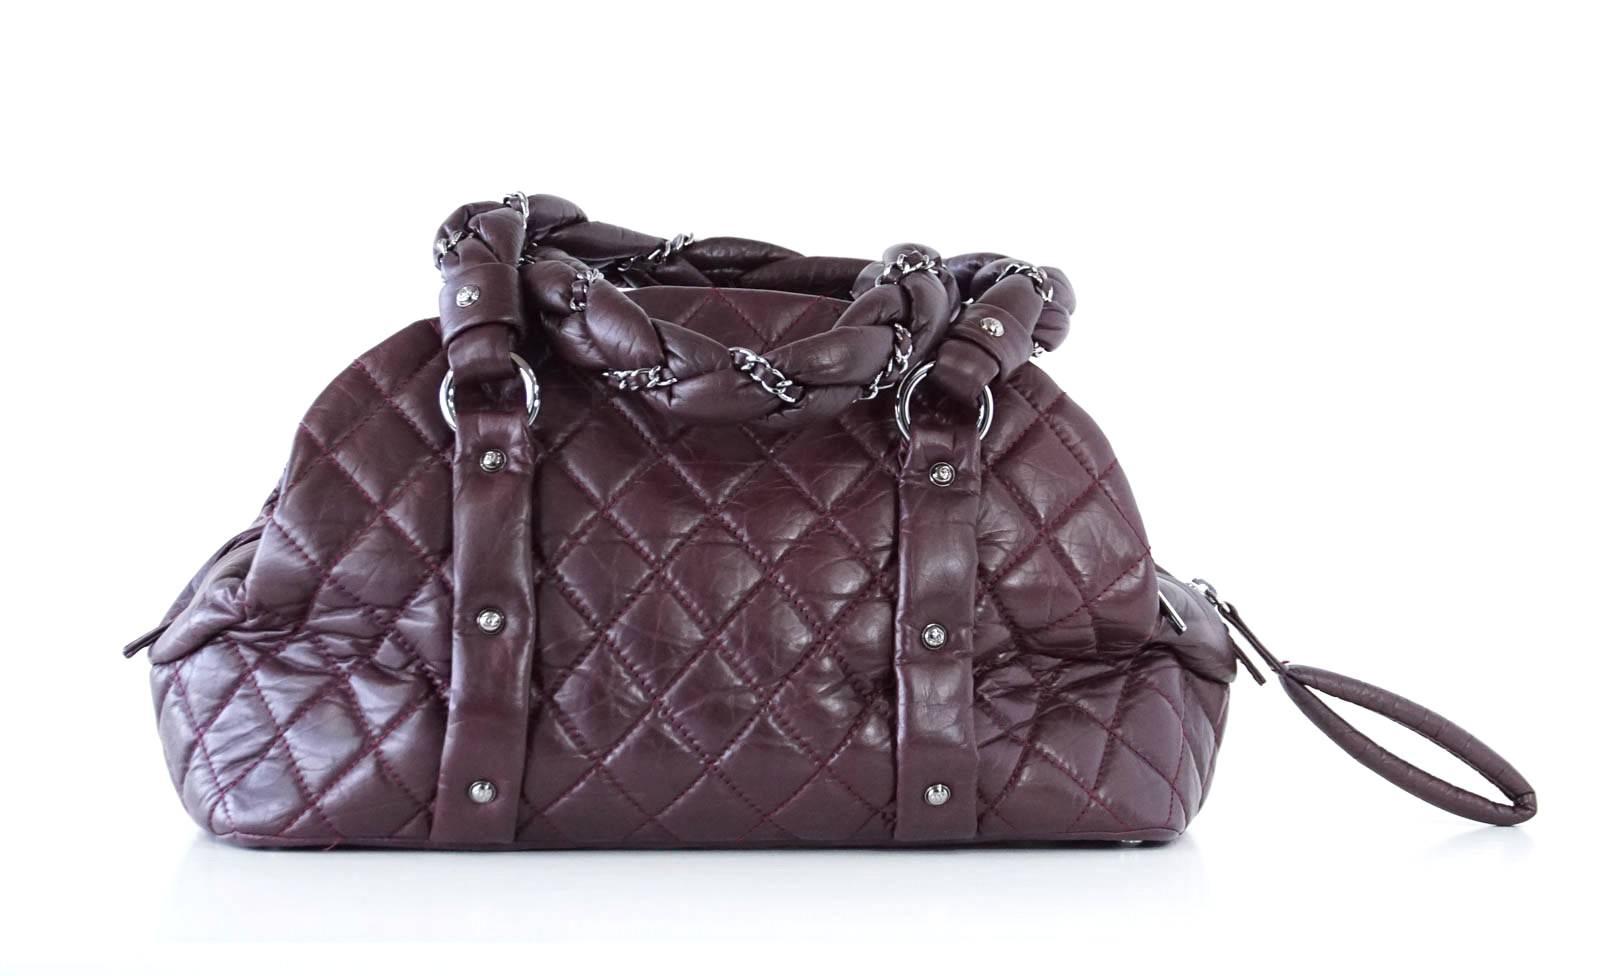 CHANEL Bag Puffer Ladybraid Bowler Bordeaux Distressed Quilted Leather 1